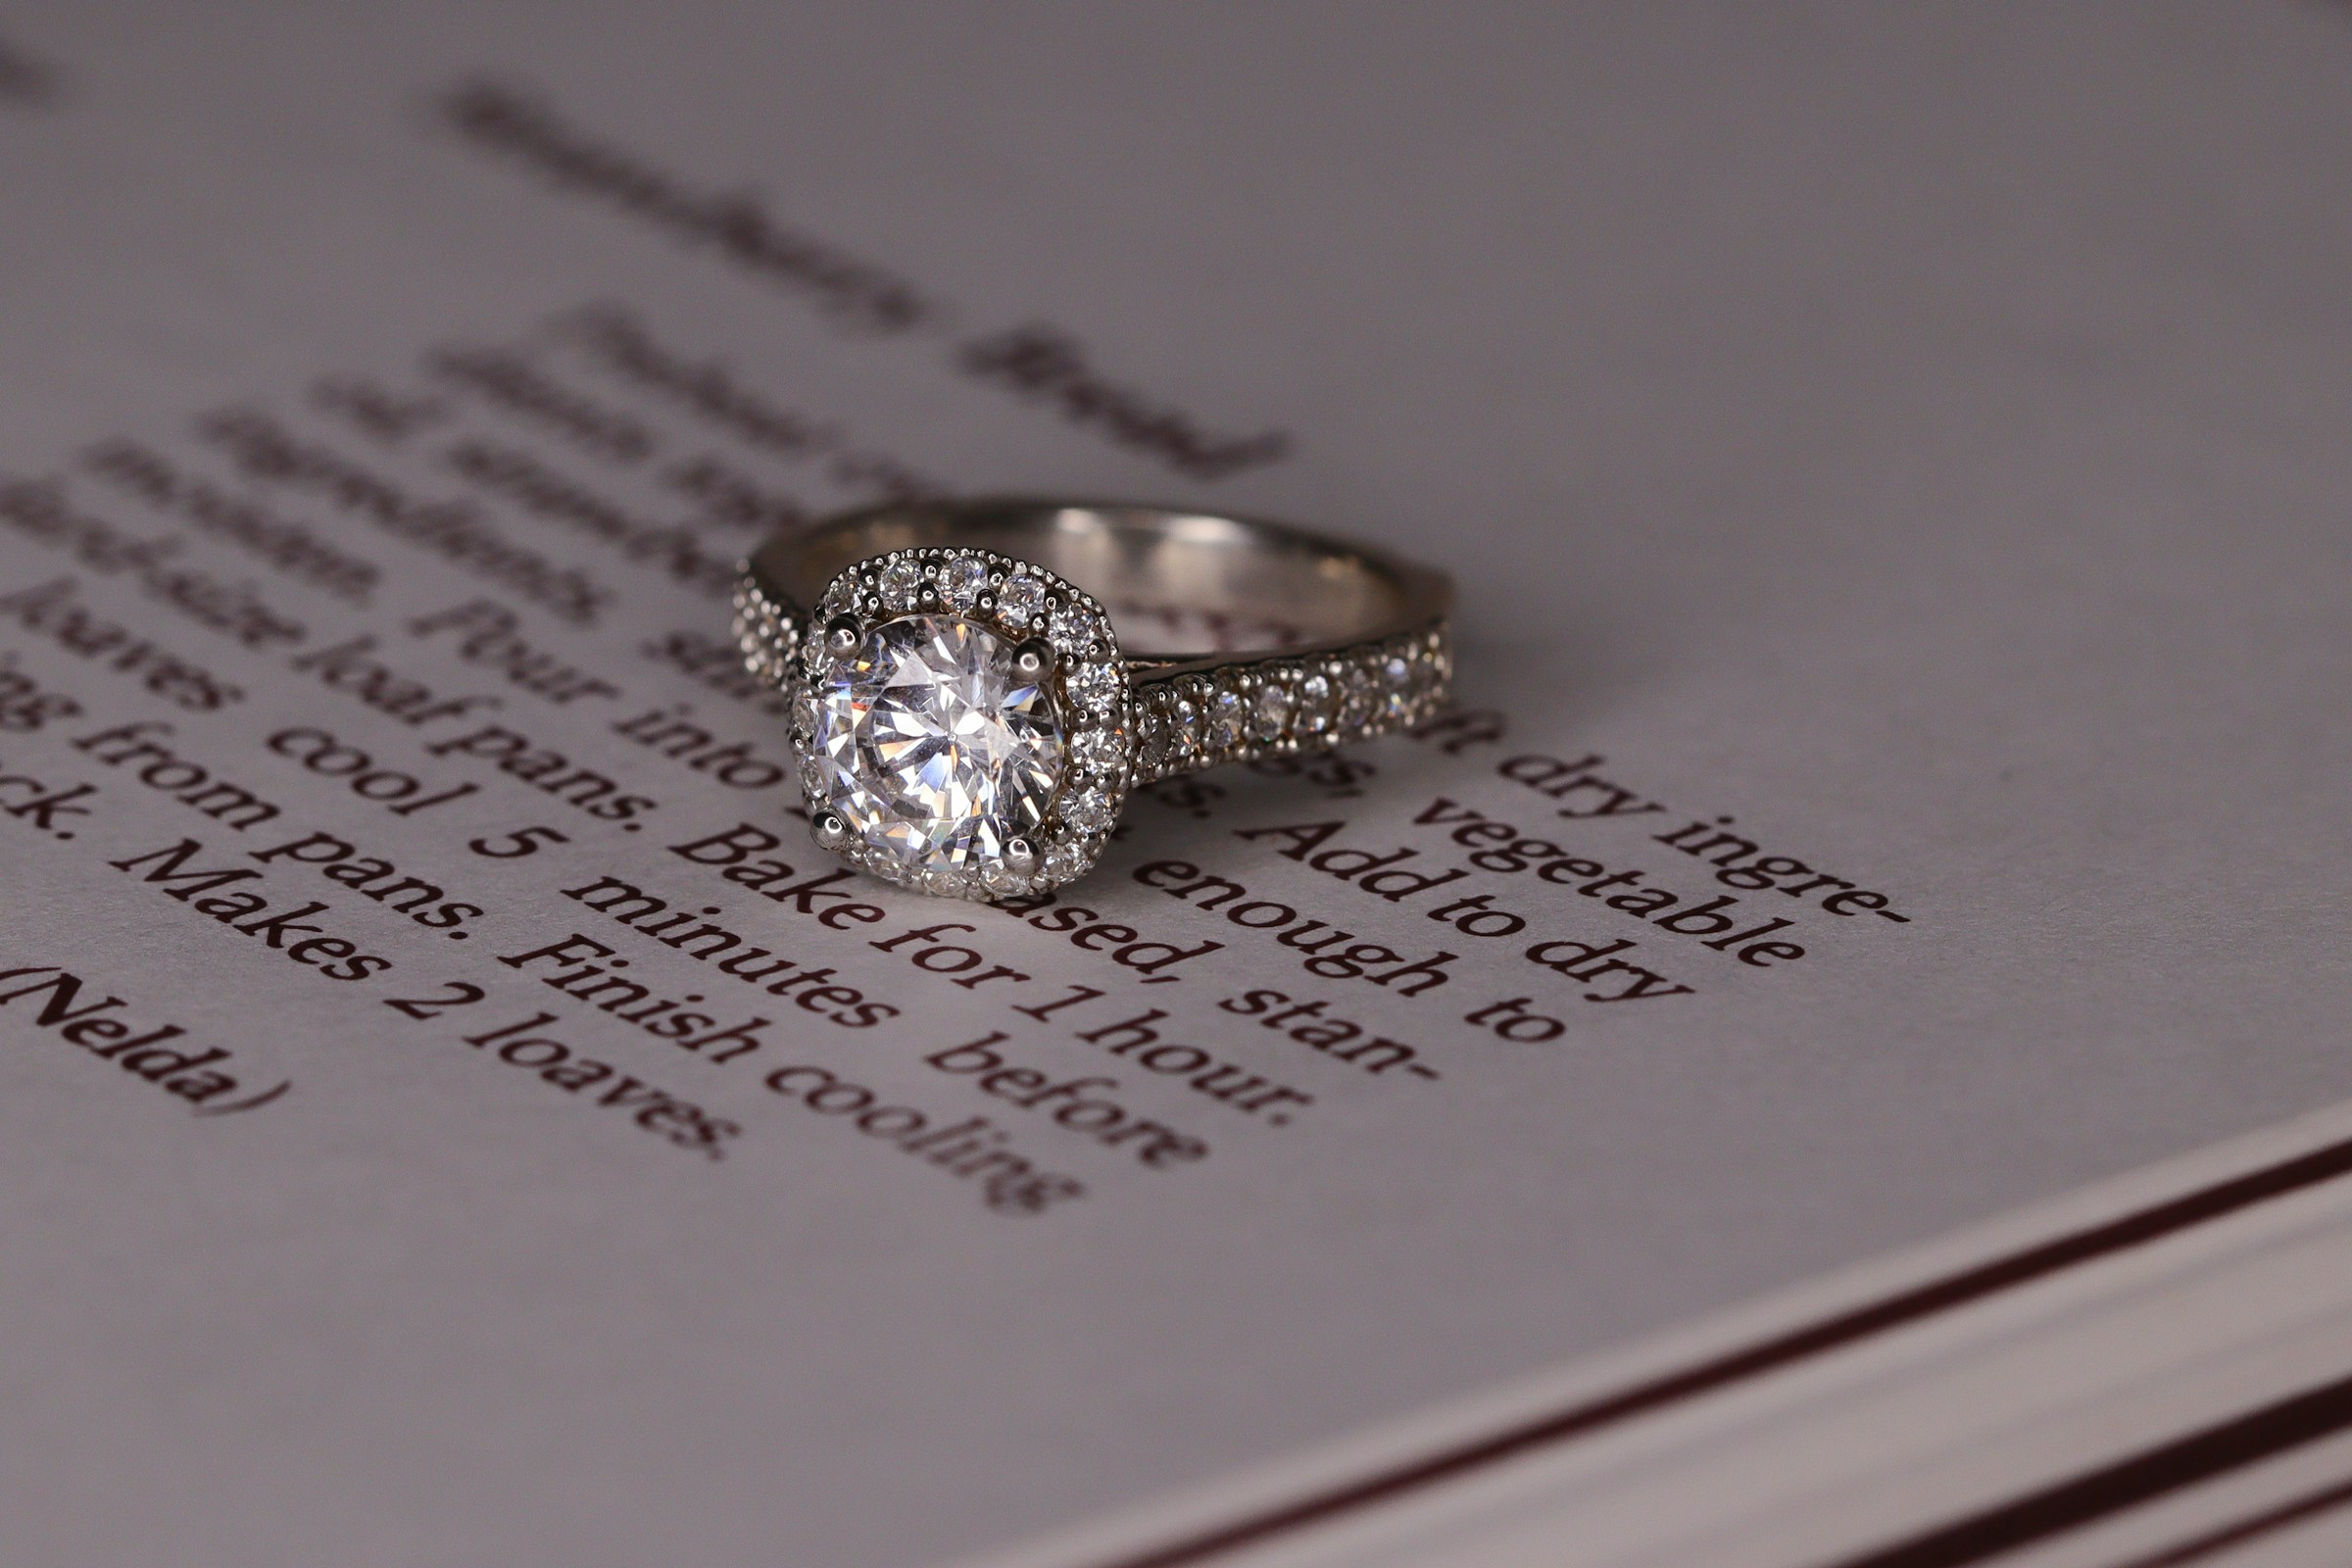 A white gold halo-style diamond engagement ring on a book | Source: Unsplash